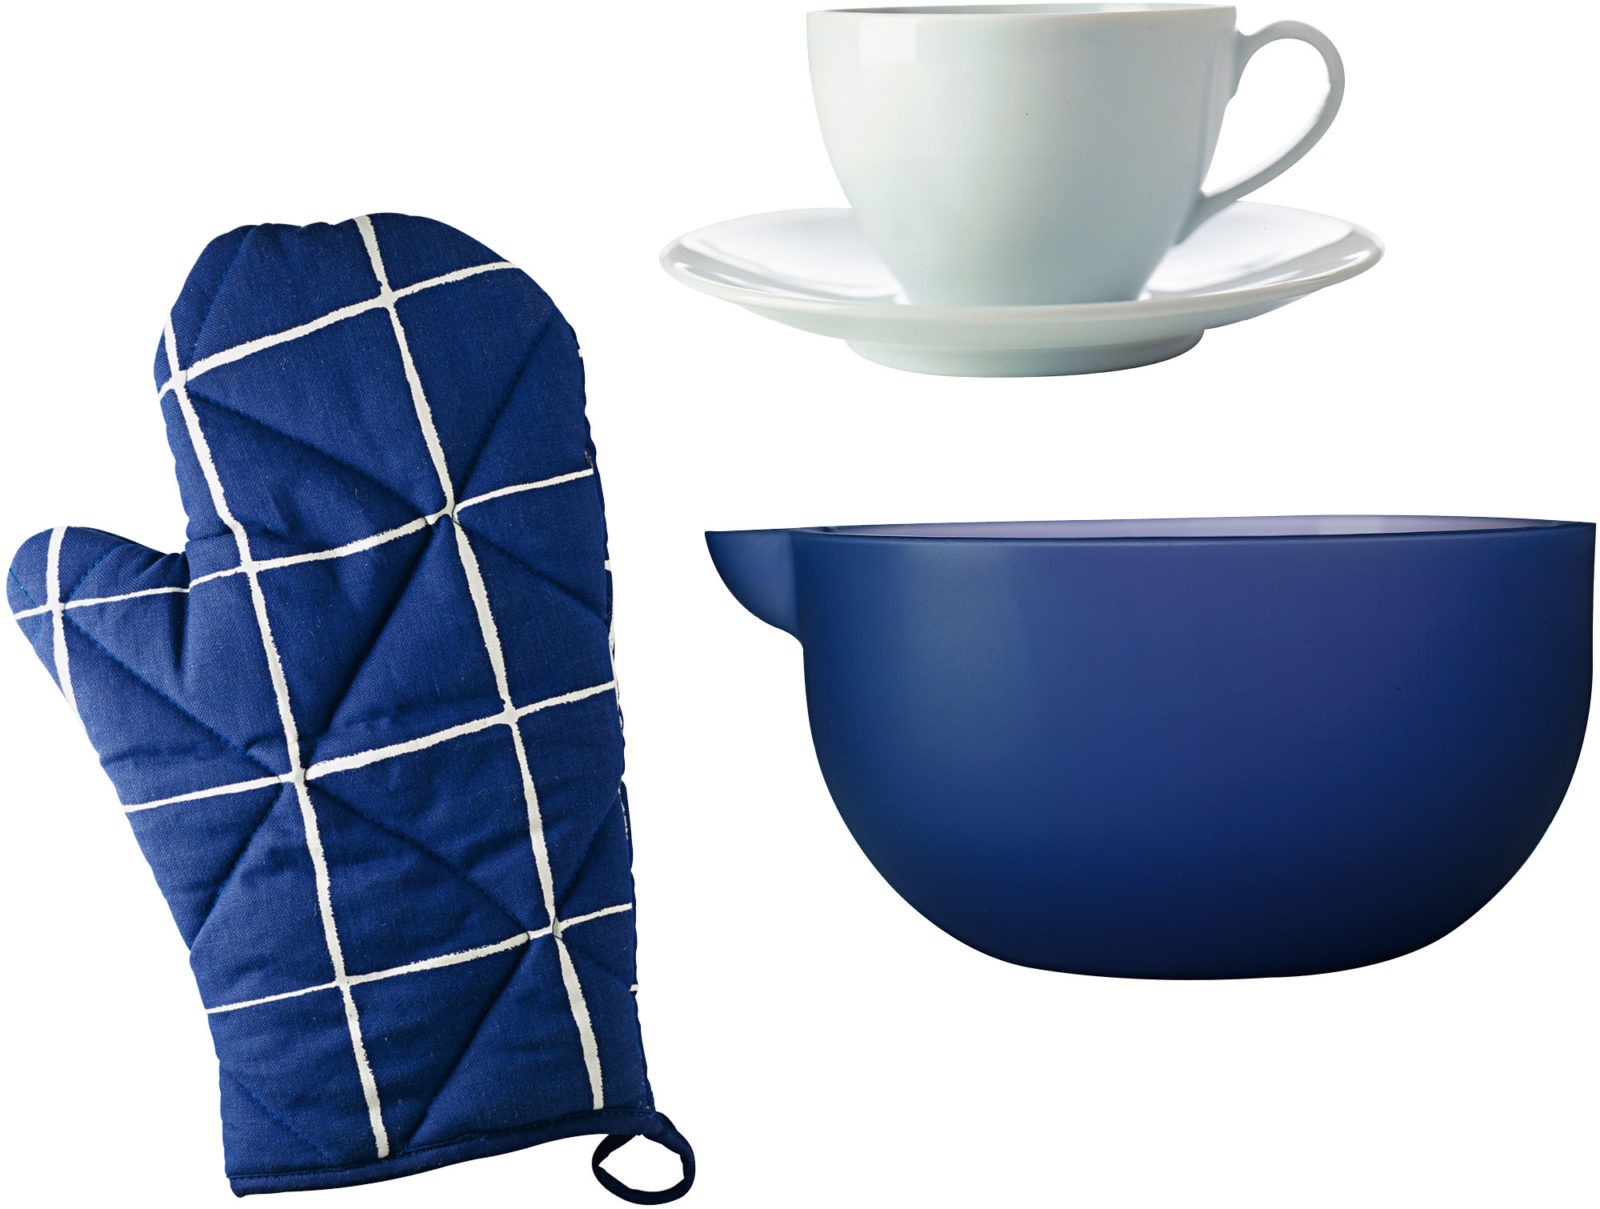 Three IKEA 365 kitchen products, one oven mitt in chequered blue and white, one blue mixing bowl, and a white cup and saucer.